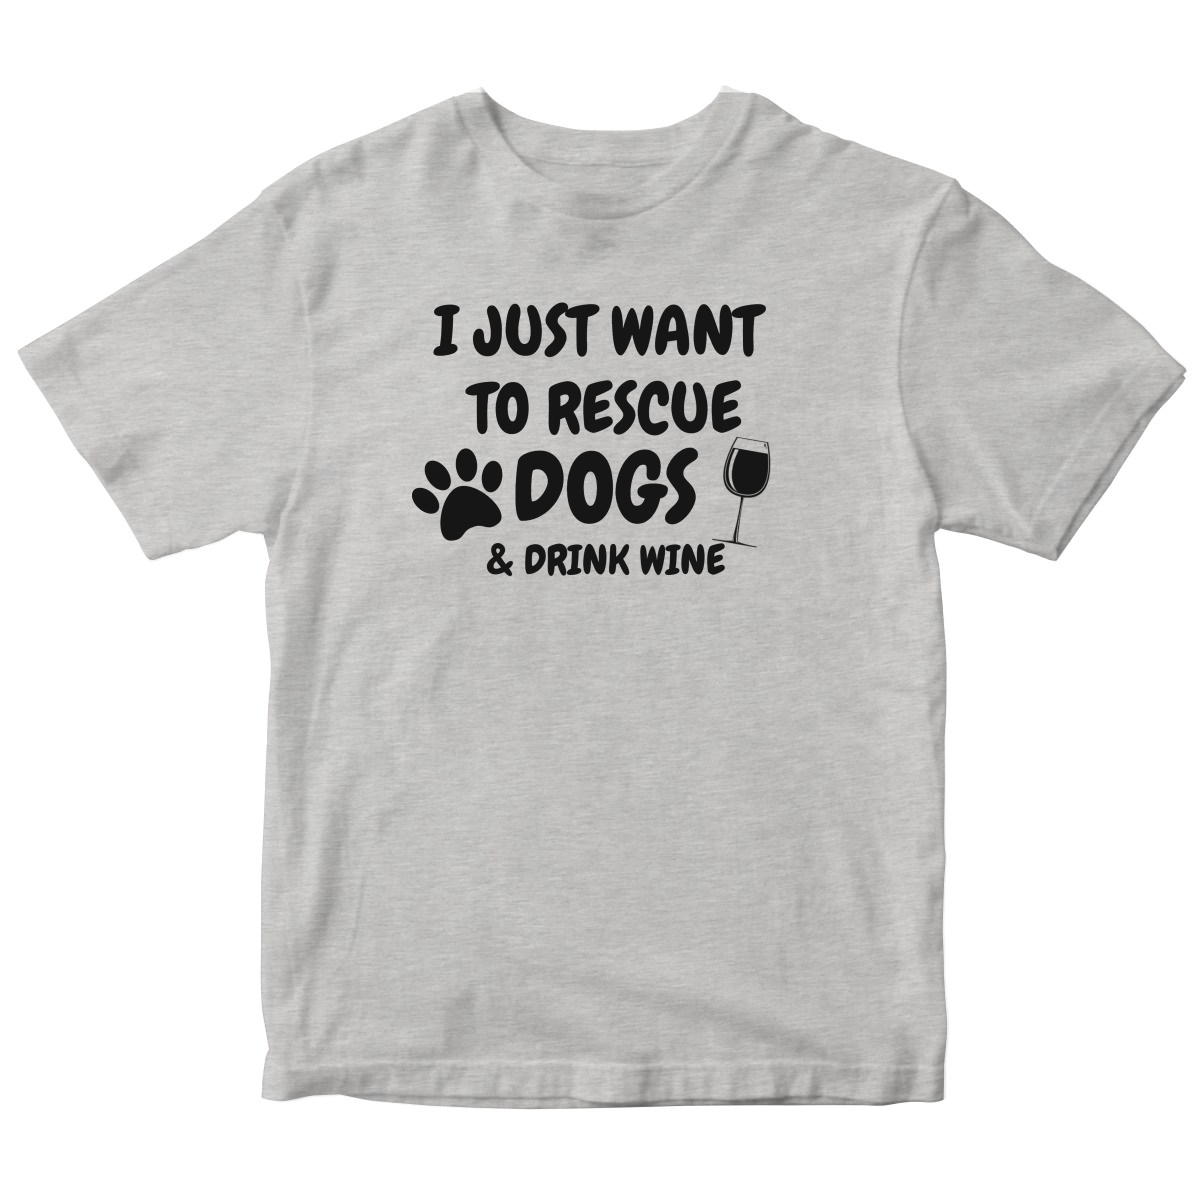 Dogs and Drink Wine Kids T-shirt | Gray